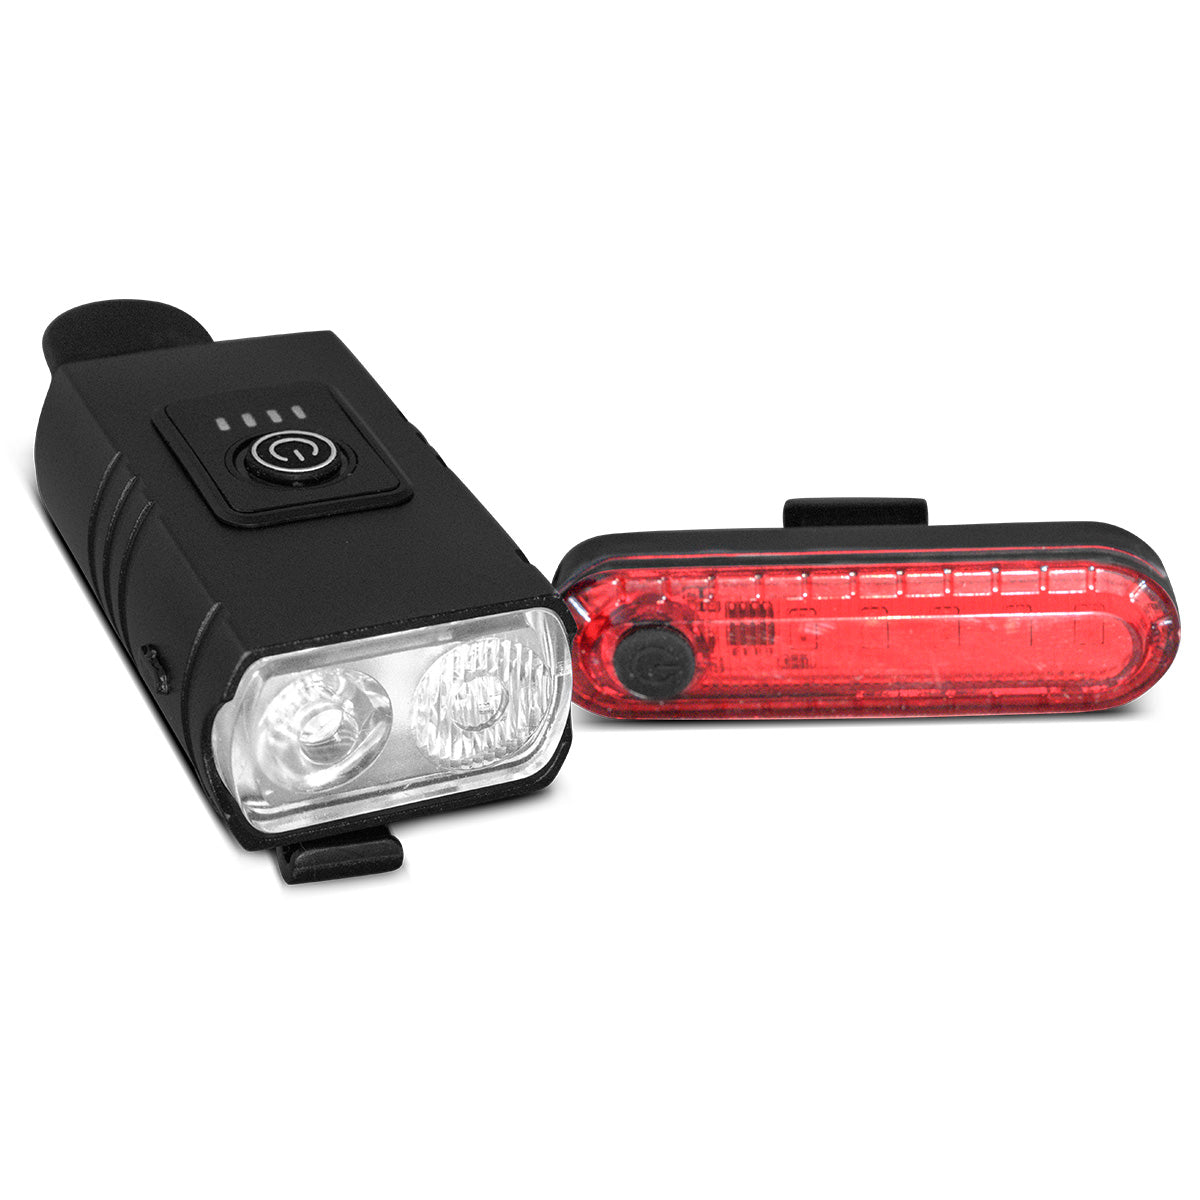 Progear LED Rechargeable Front and Rear Light Set